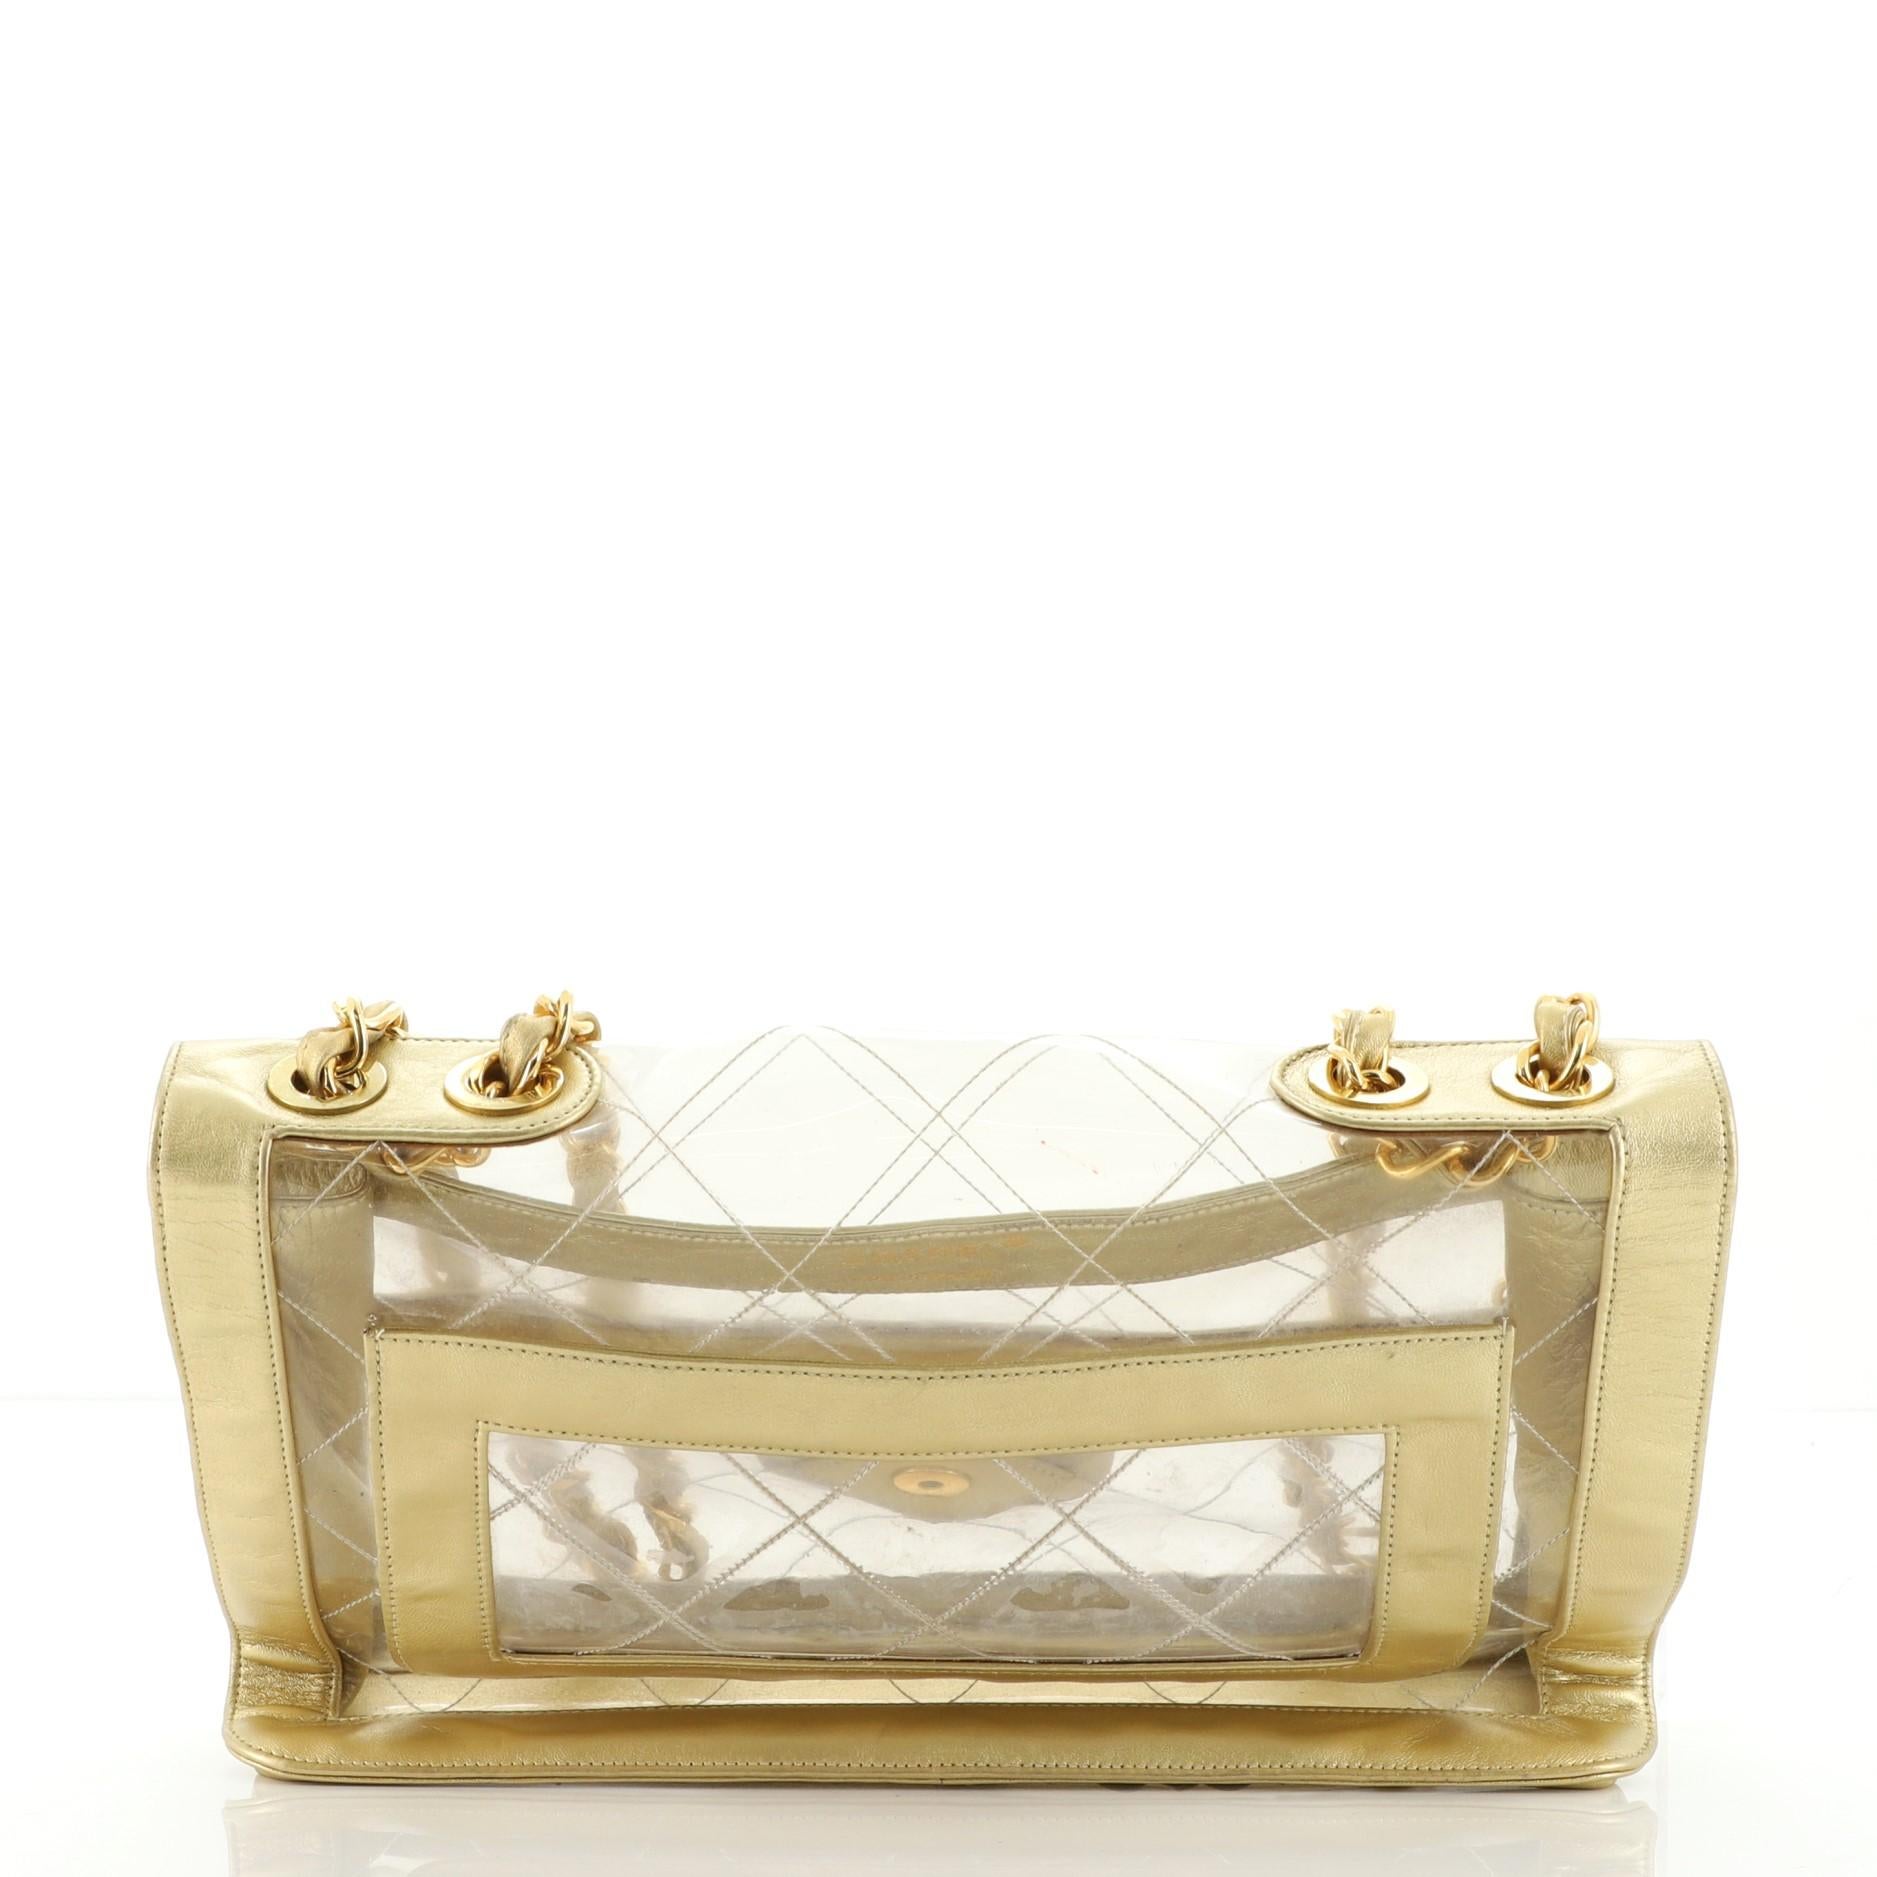 Chanel Vintage Naked Flap Bag Quilted PVC Maxi. Odor in interior. Loss of luster, heavy creasing and scuffs on exterior and in interior, wear on base corners and strap leather trim, indentations on base. Bubbling on leather trims, loose stitching on